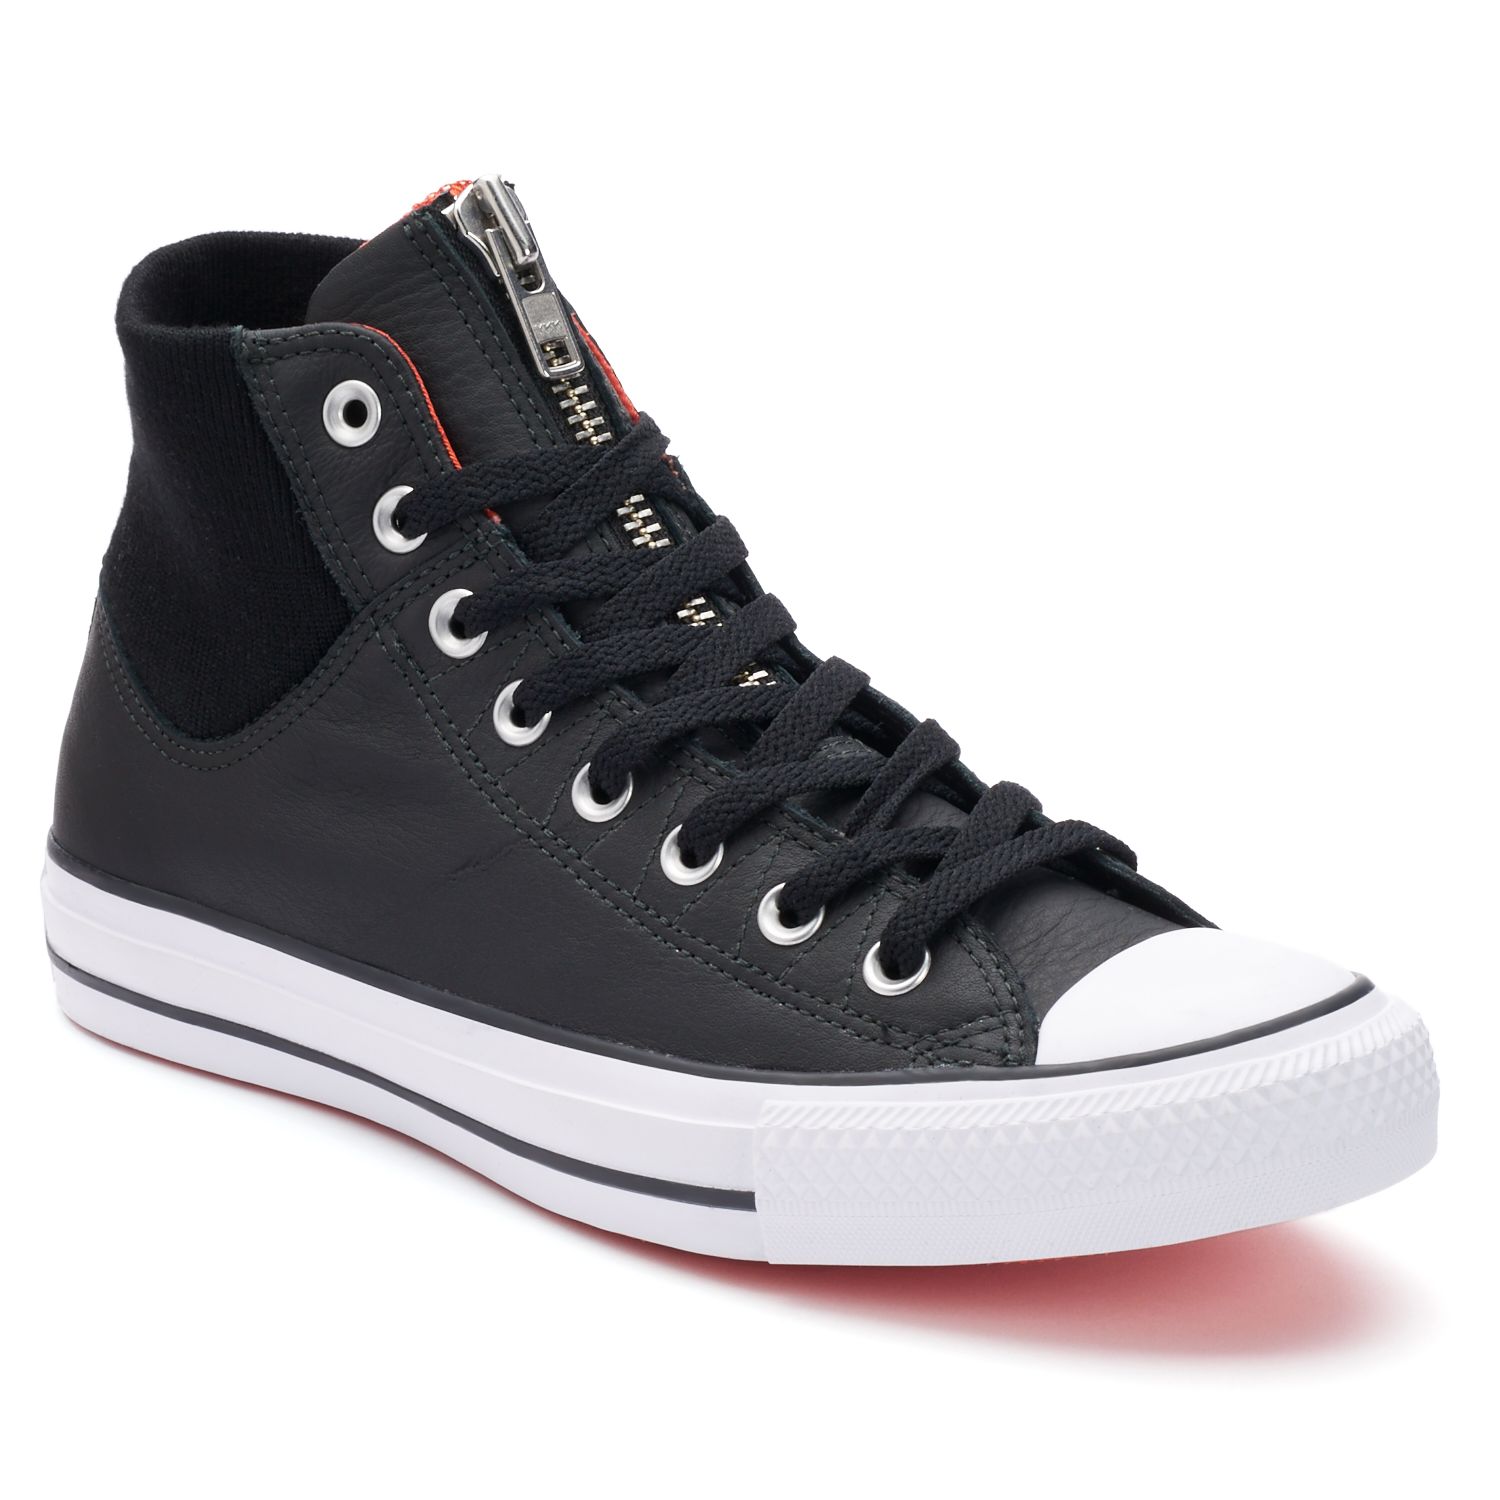 Men's Converse Chuck Taylor All Star MA-1 Zip High-Top Sneakers